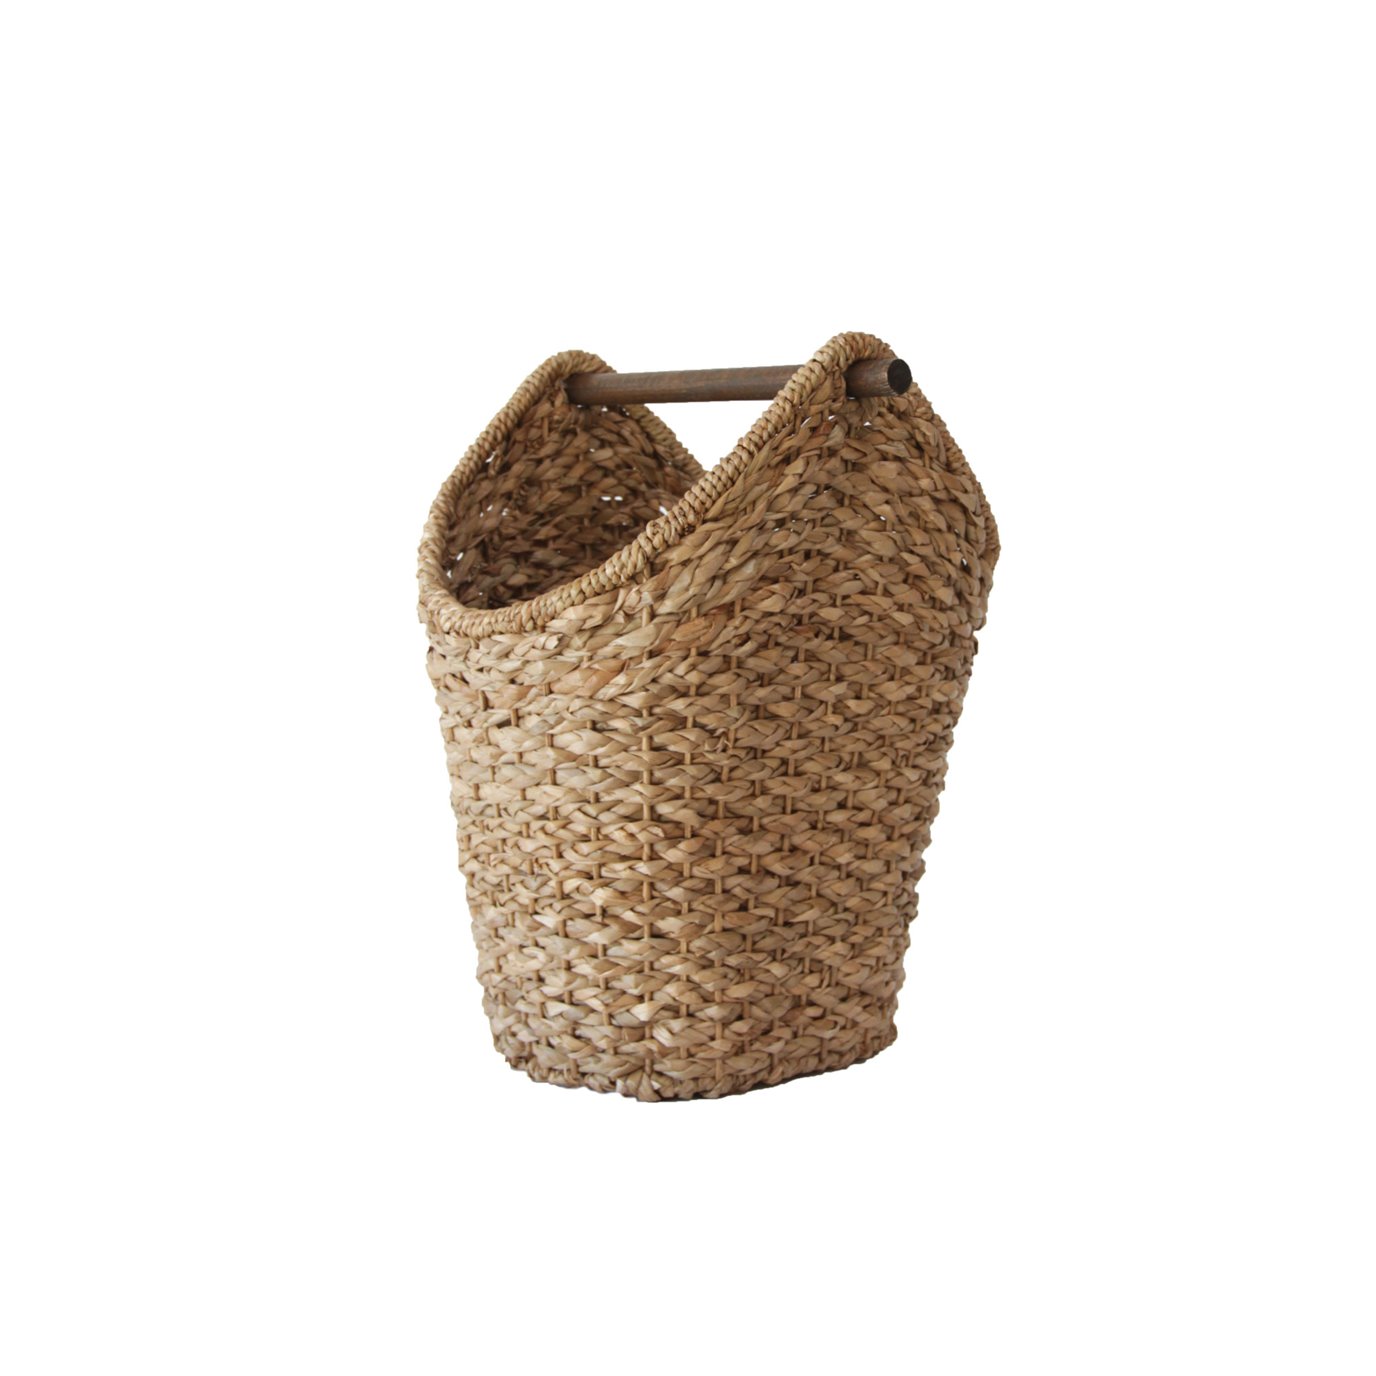 Bankuan Braided Oval Toilet Paper Basket with Wood Bar